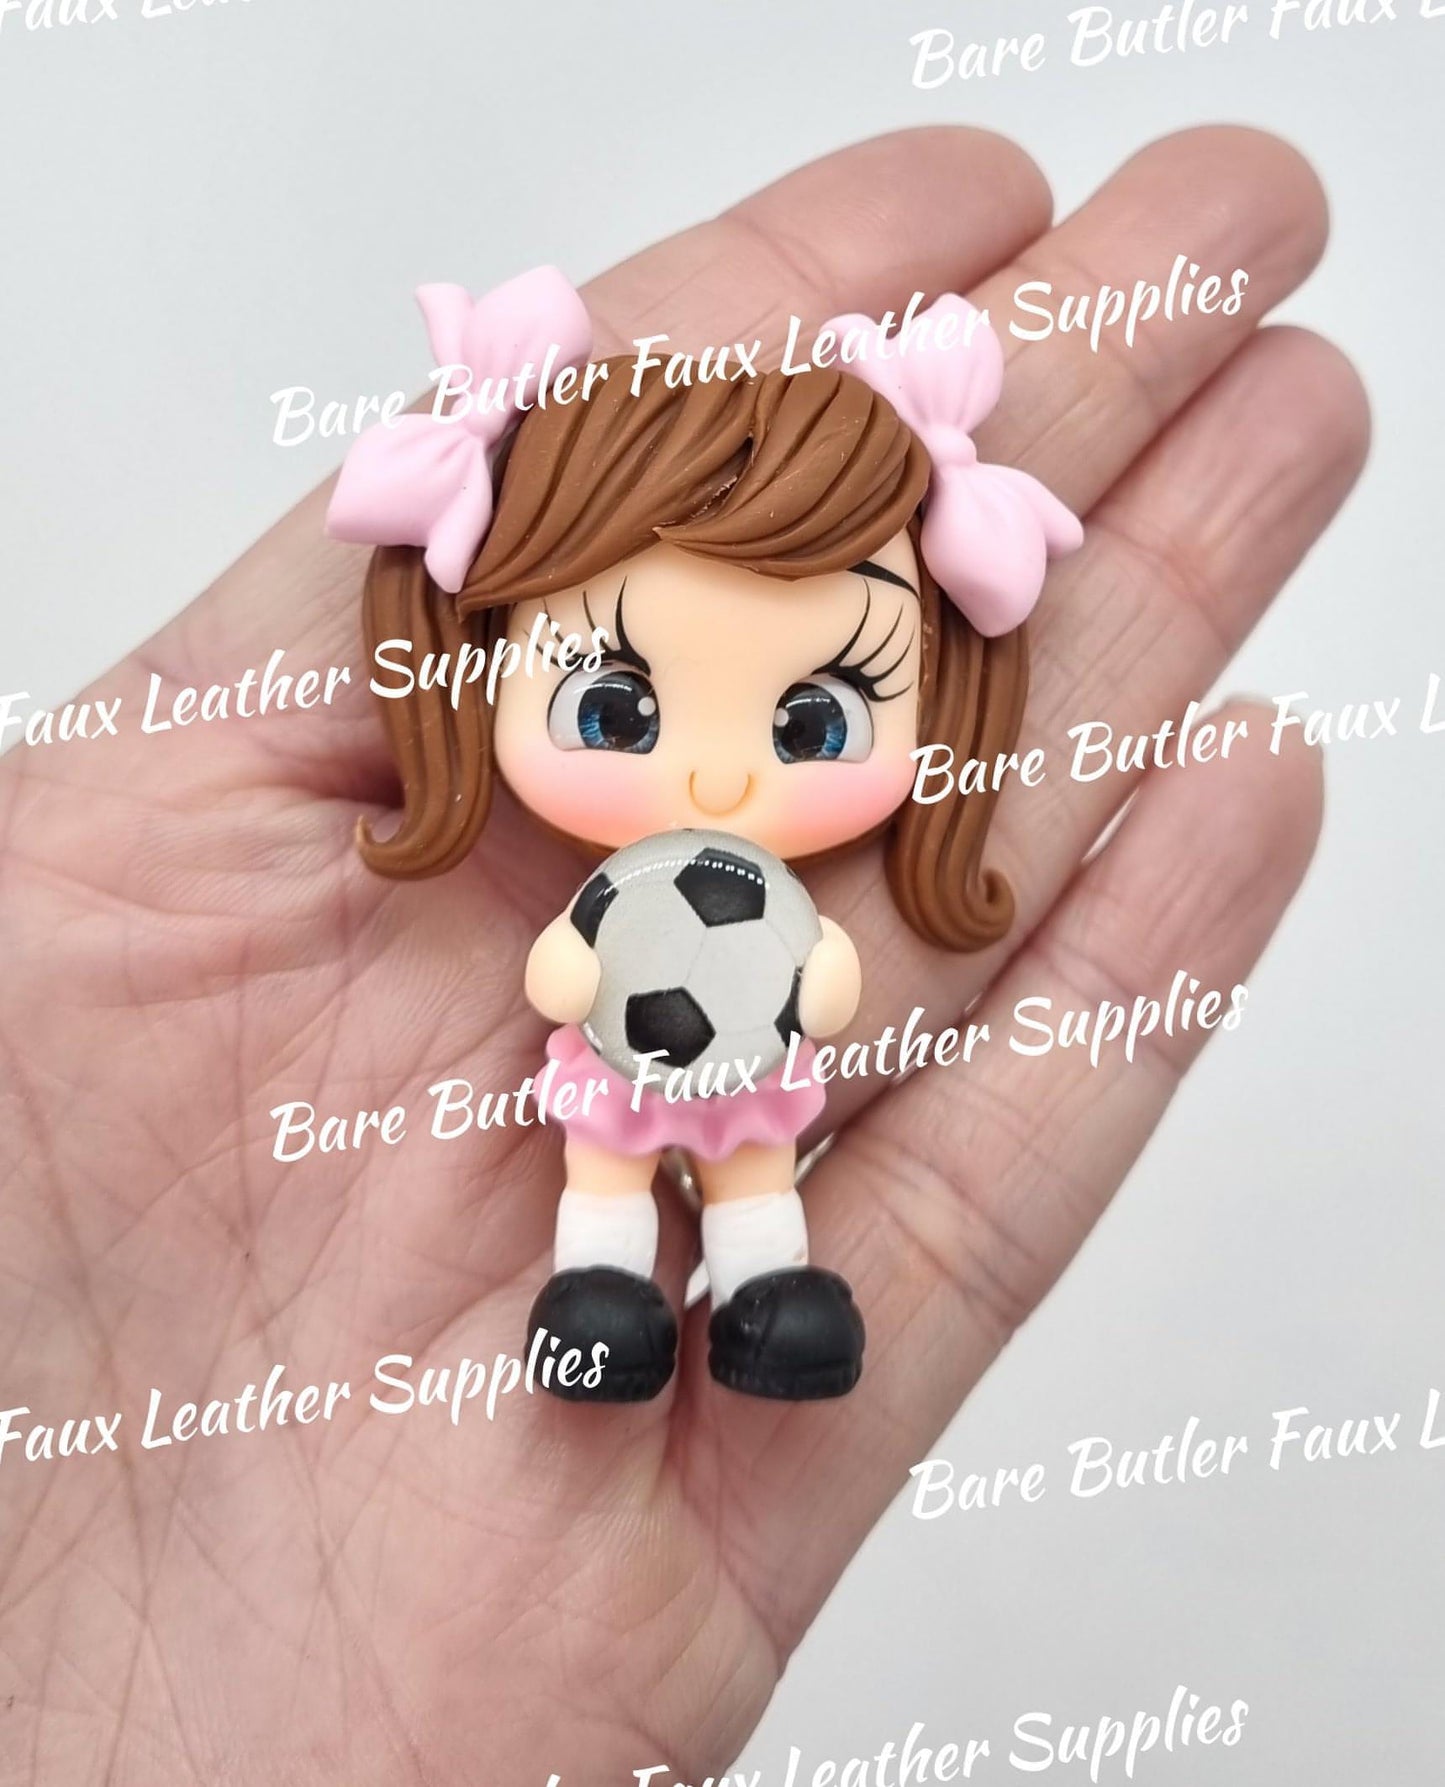 Soccer Girl Pink - Bare Butler Faux Leather Supplies 